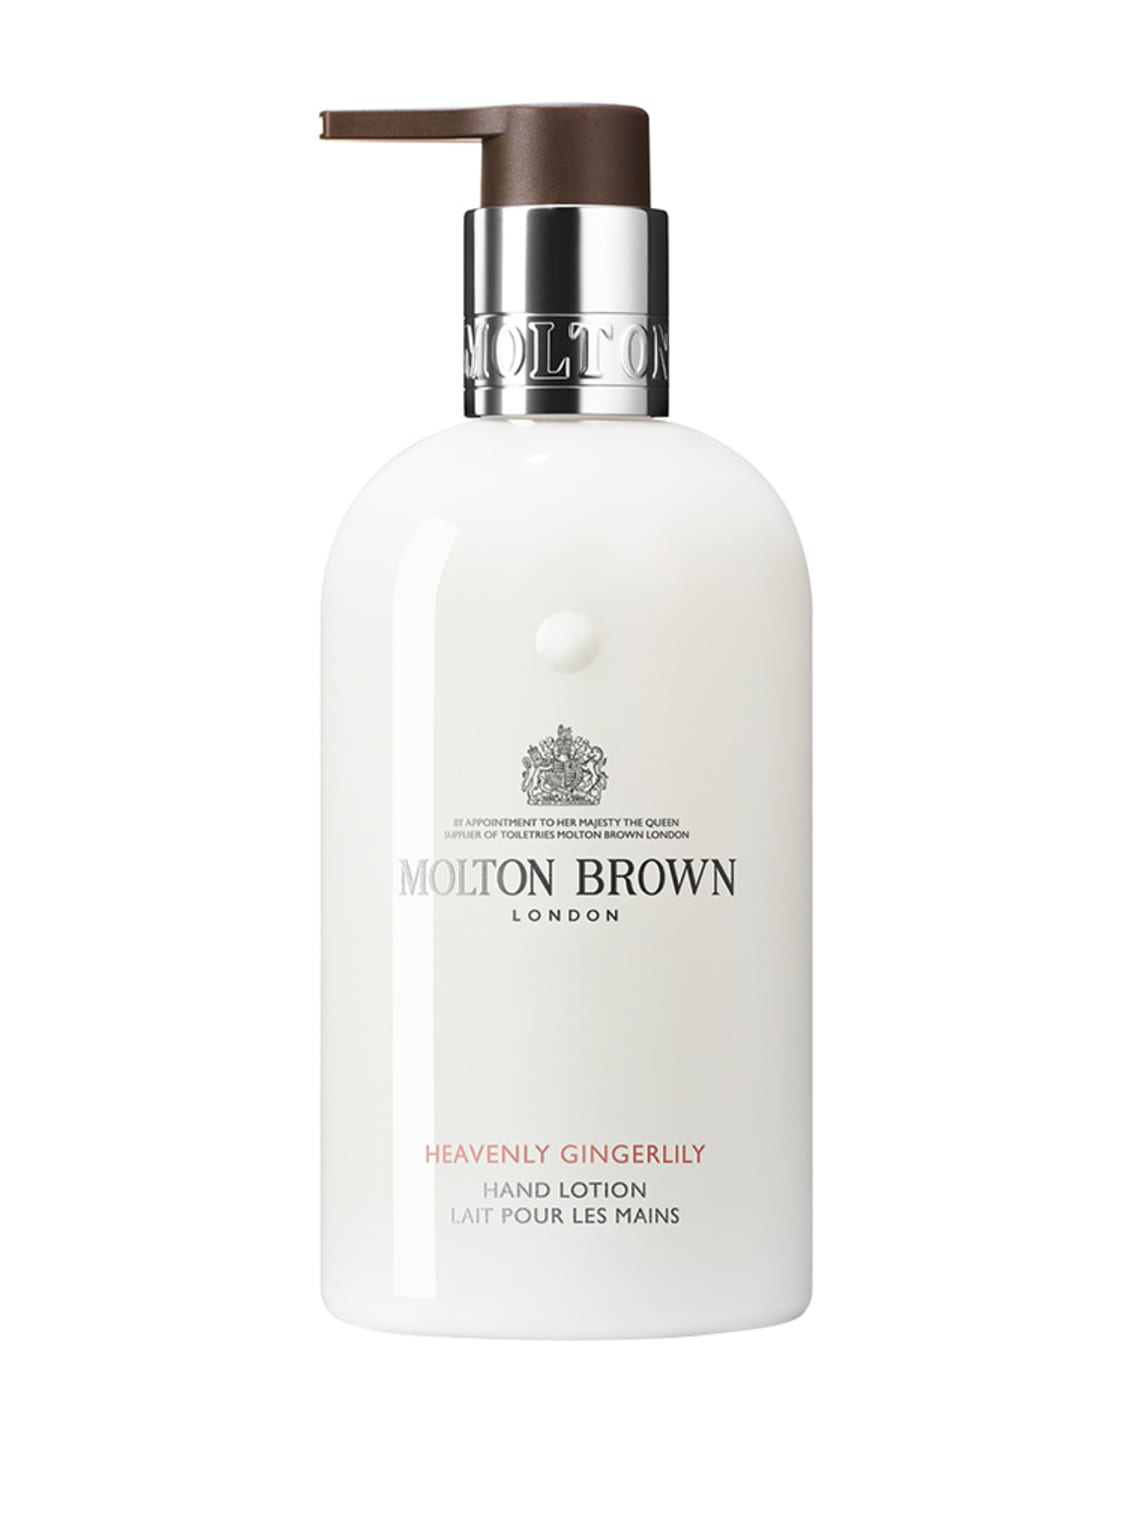 Molton Brown Heavenly Gingerlily Hand Lotion 300 ml von MOLTON BROWN